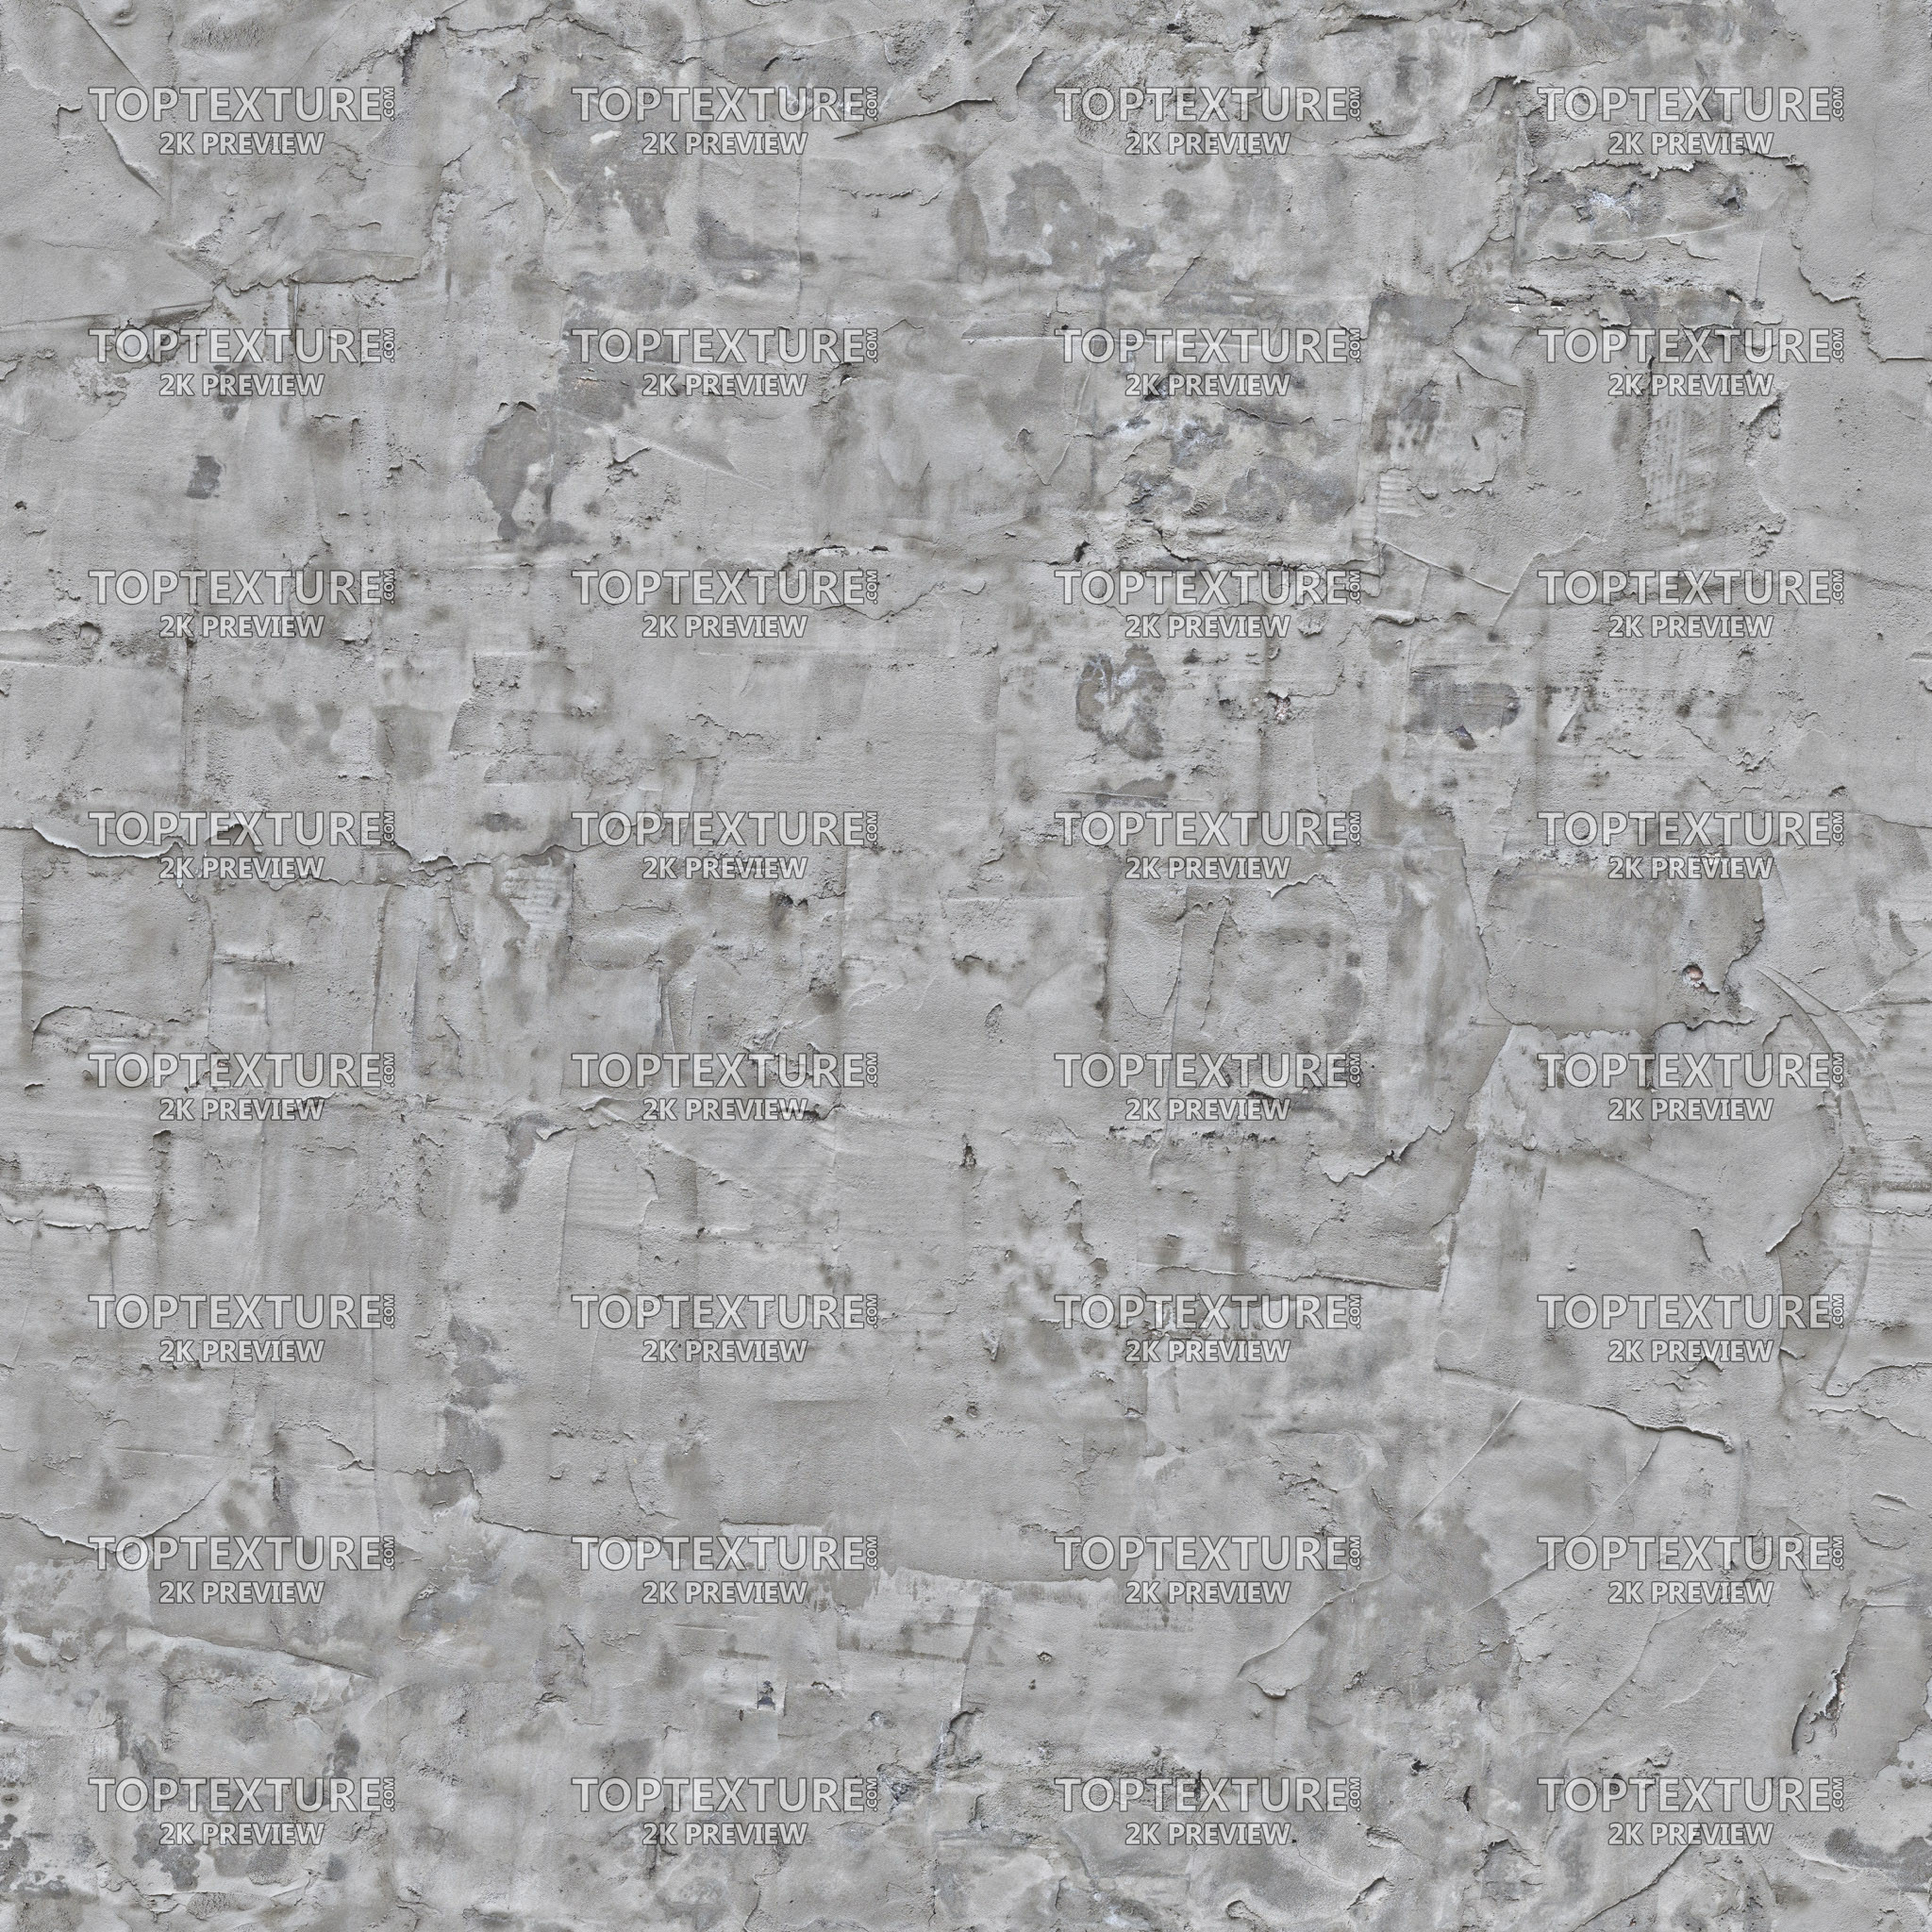 Rough Cement Plaster - 2K preview